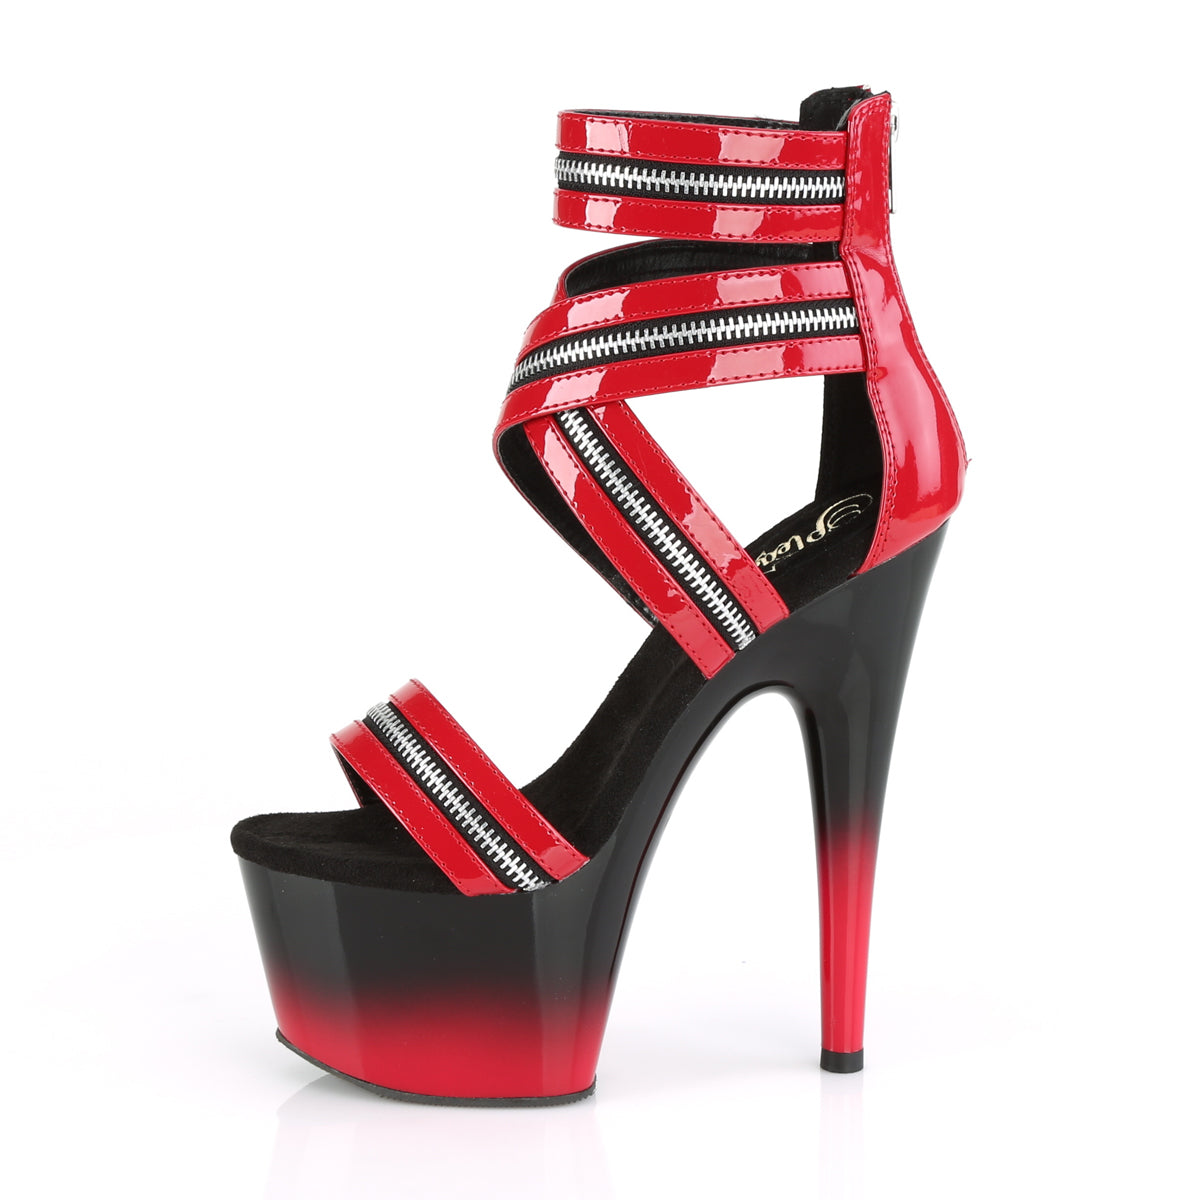 Pleaser Sandalias para mujer ADORE-766 Red Pat / Blk-Red